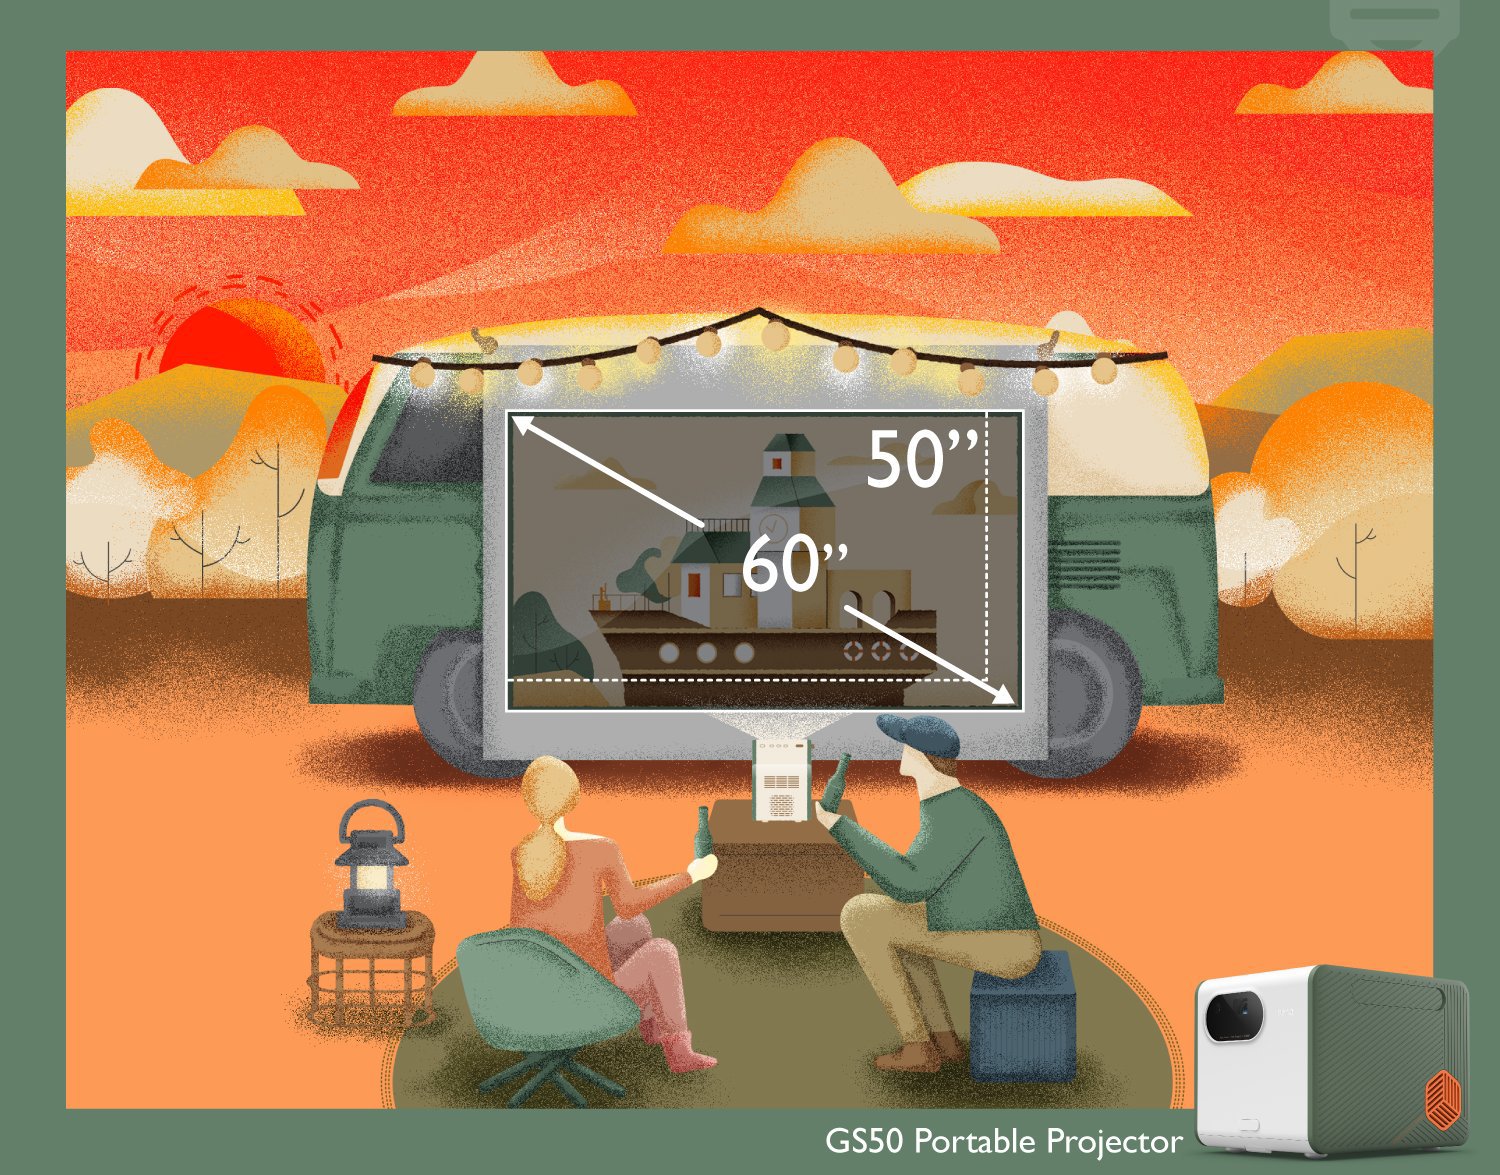 friends using a GS50 portable projector by the camper